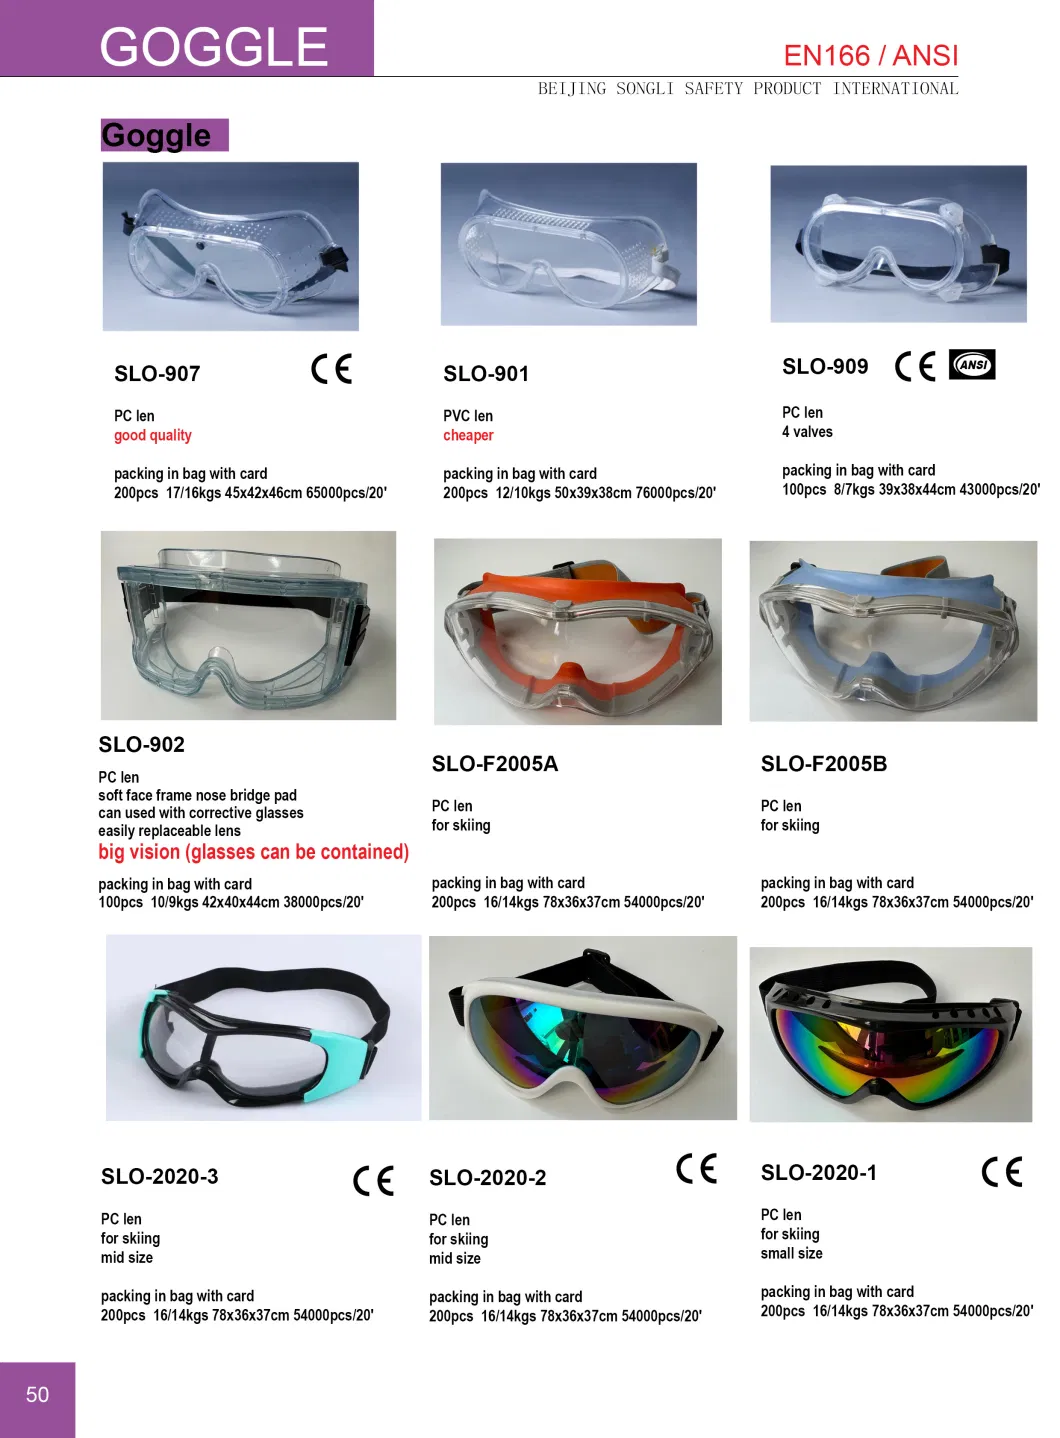 Slo-Jl-A018-1 Protective Eye Wear Protection Goggle Spectative Safety Glasses Welding Glasses